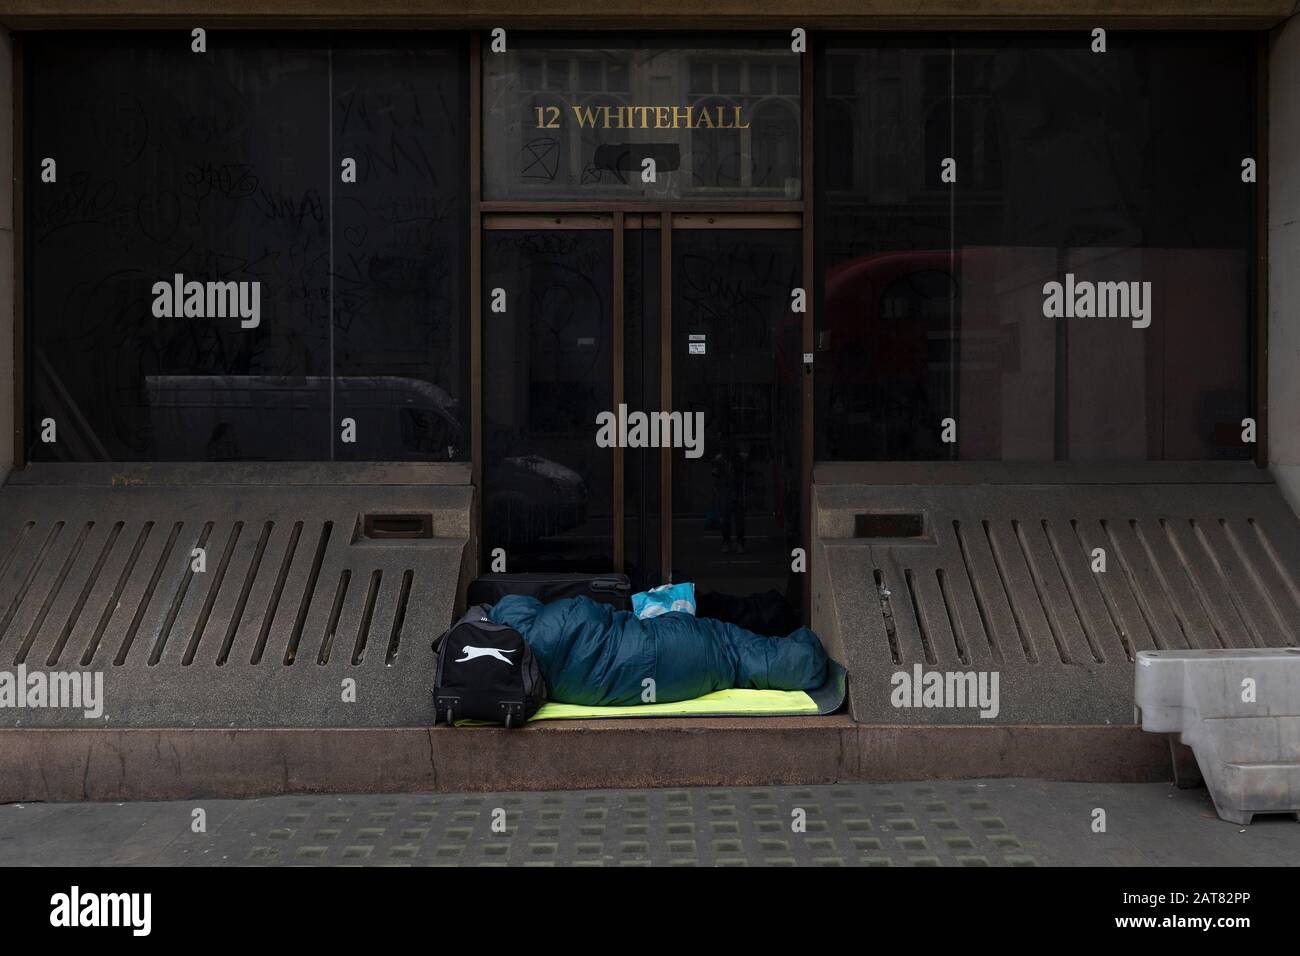 London, UK. 31 January 2020. On the day Britain formerly leaves the EU, a homeless person sleeps in a doorway outside number 12 Whitehall. Stock Photo